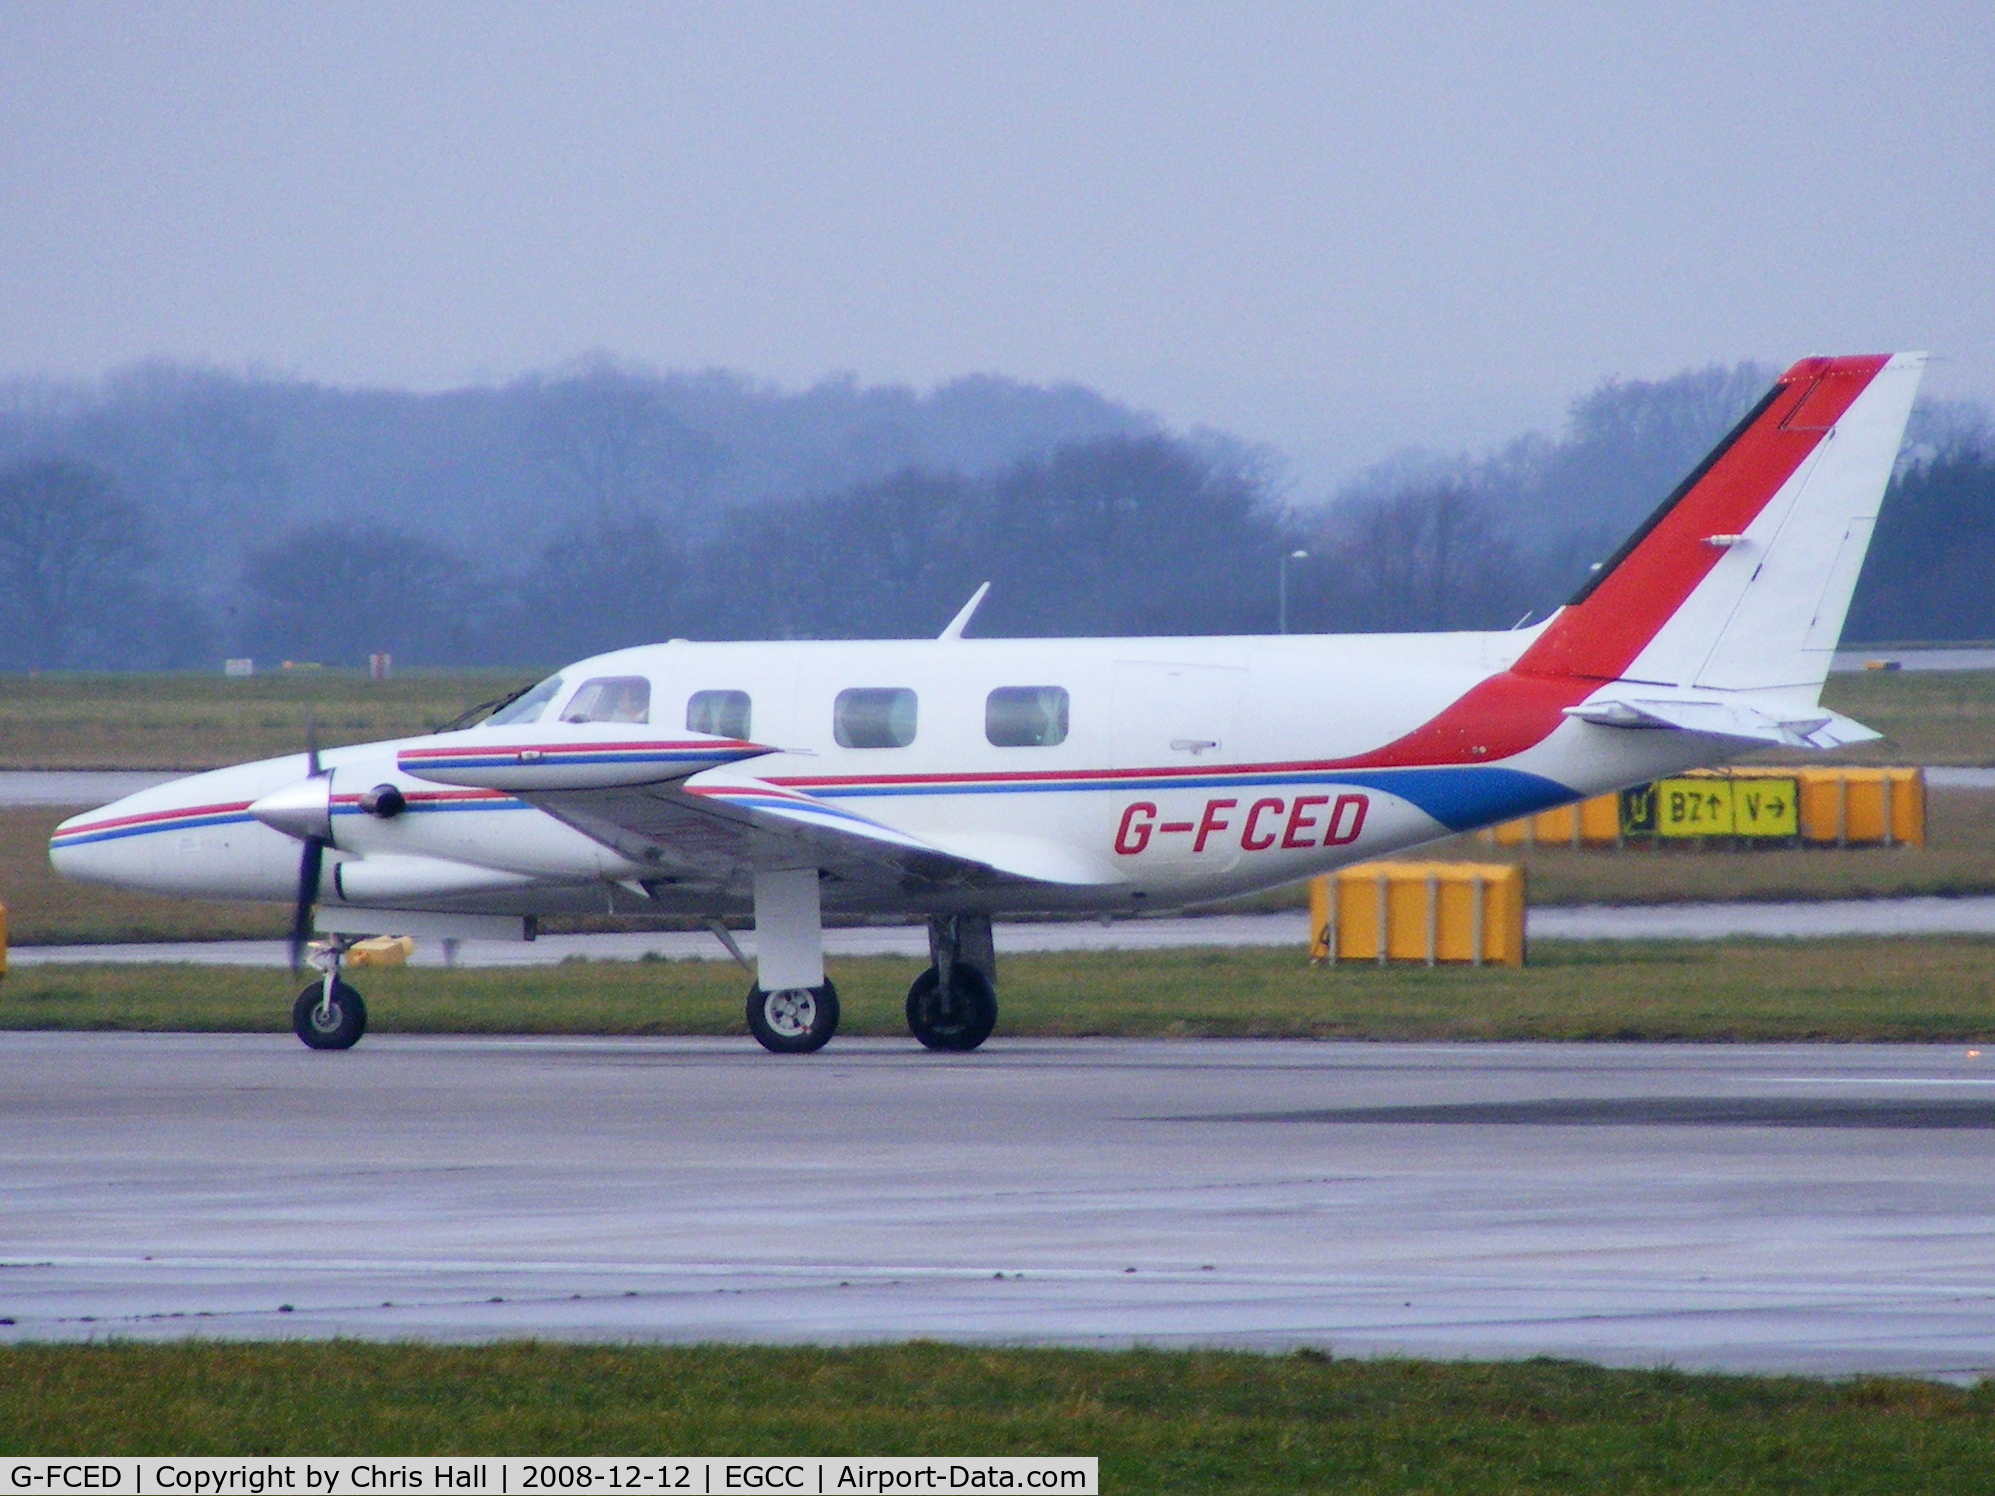 G-FCED, 1981 Piper PA-31T2-620 Cheyenne IIXL C/N 31T-8166013, departing from Manchester